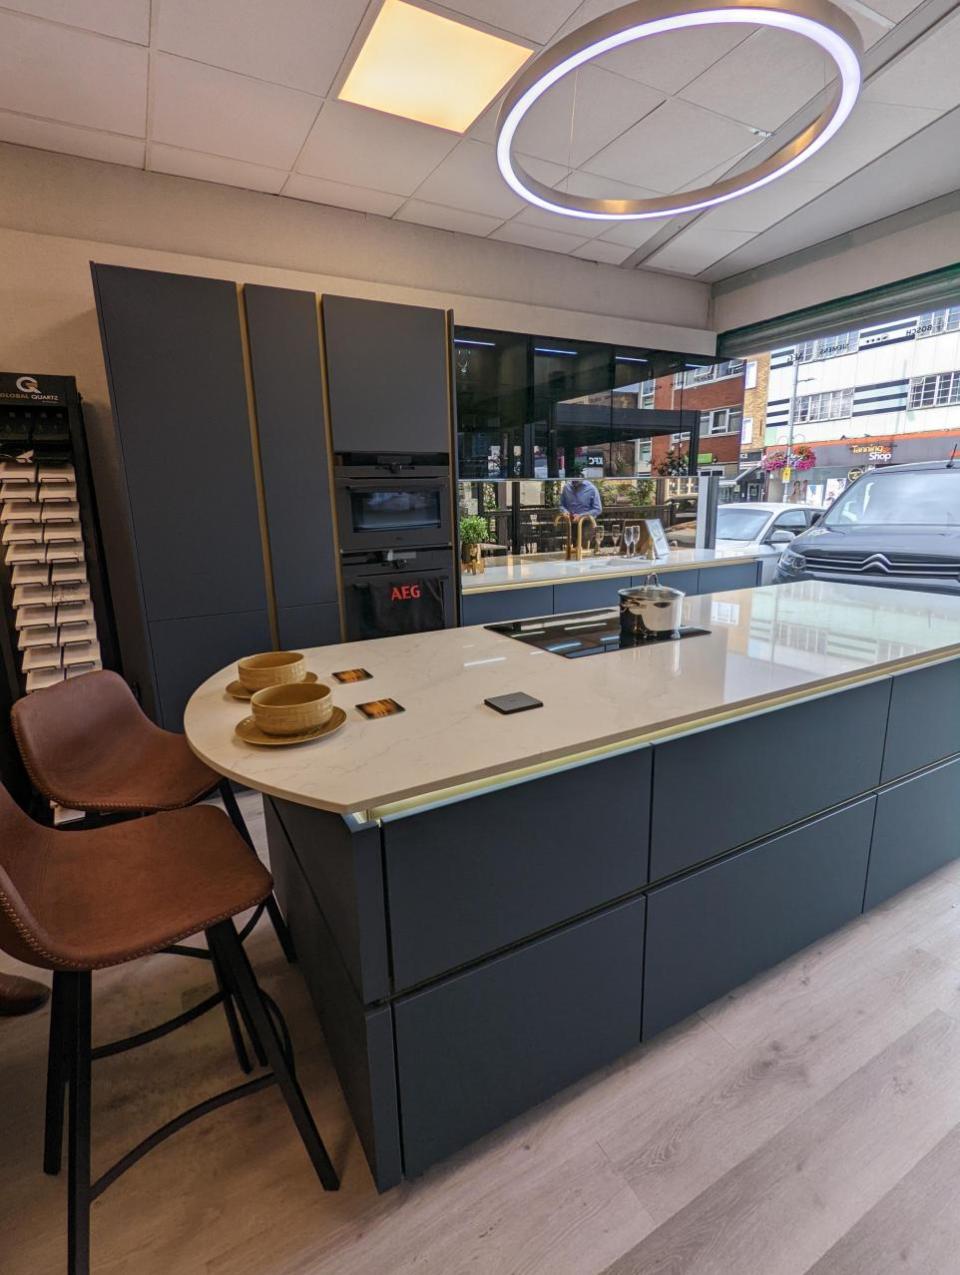 News Shopper: The showroom features several kitchen displays and appliances from well-known brands